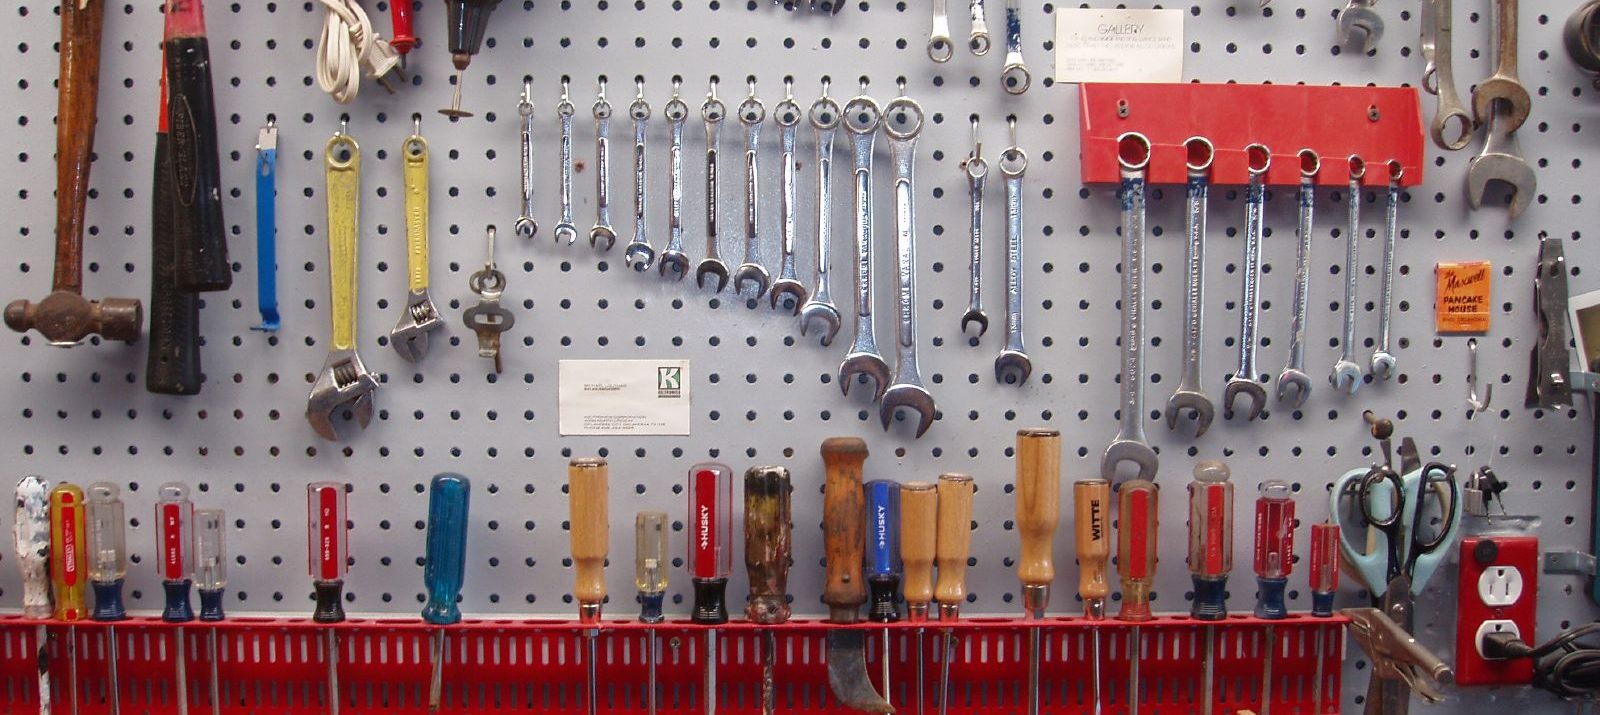 Tip #6 To Organize Your Garage: Use Pegboards To Organize & Store Your Tools